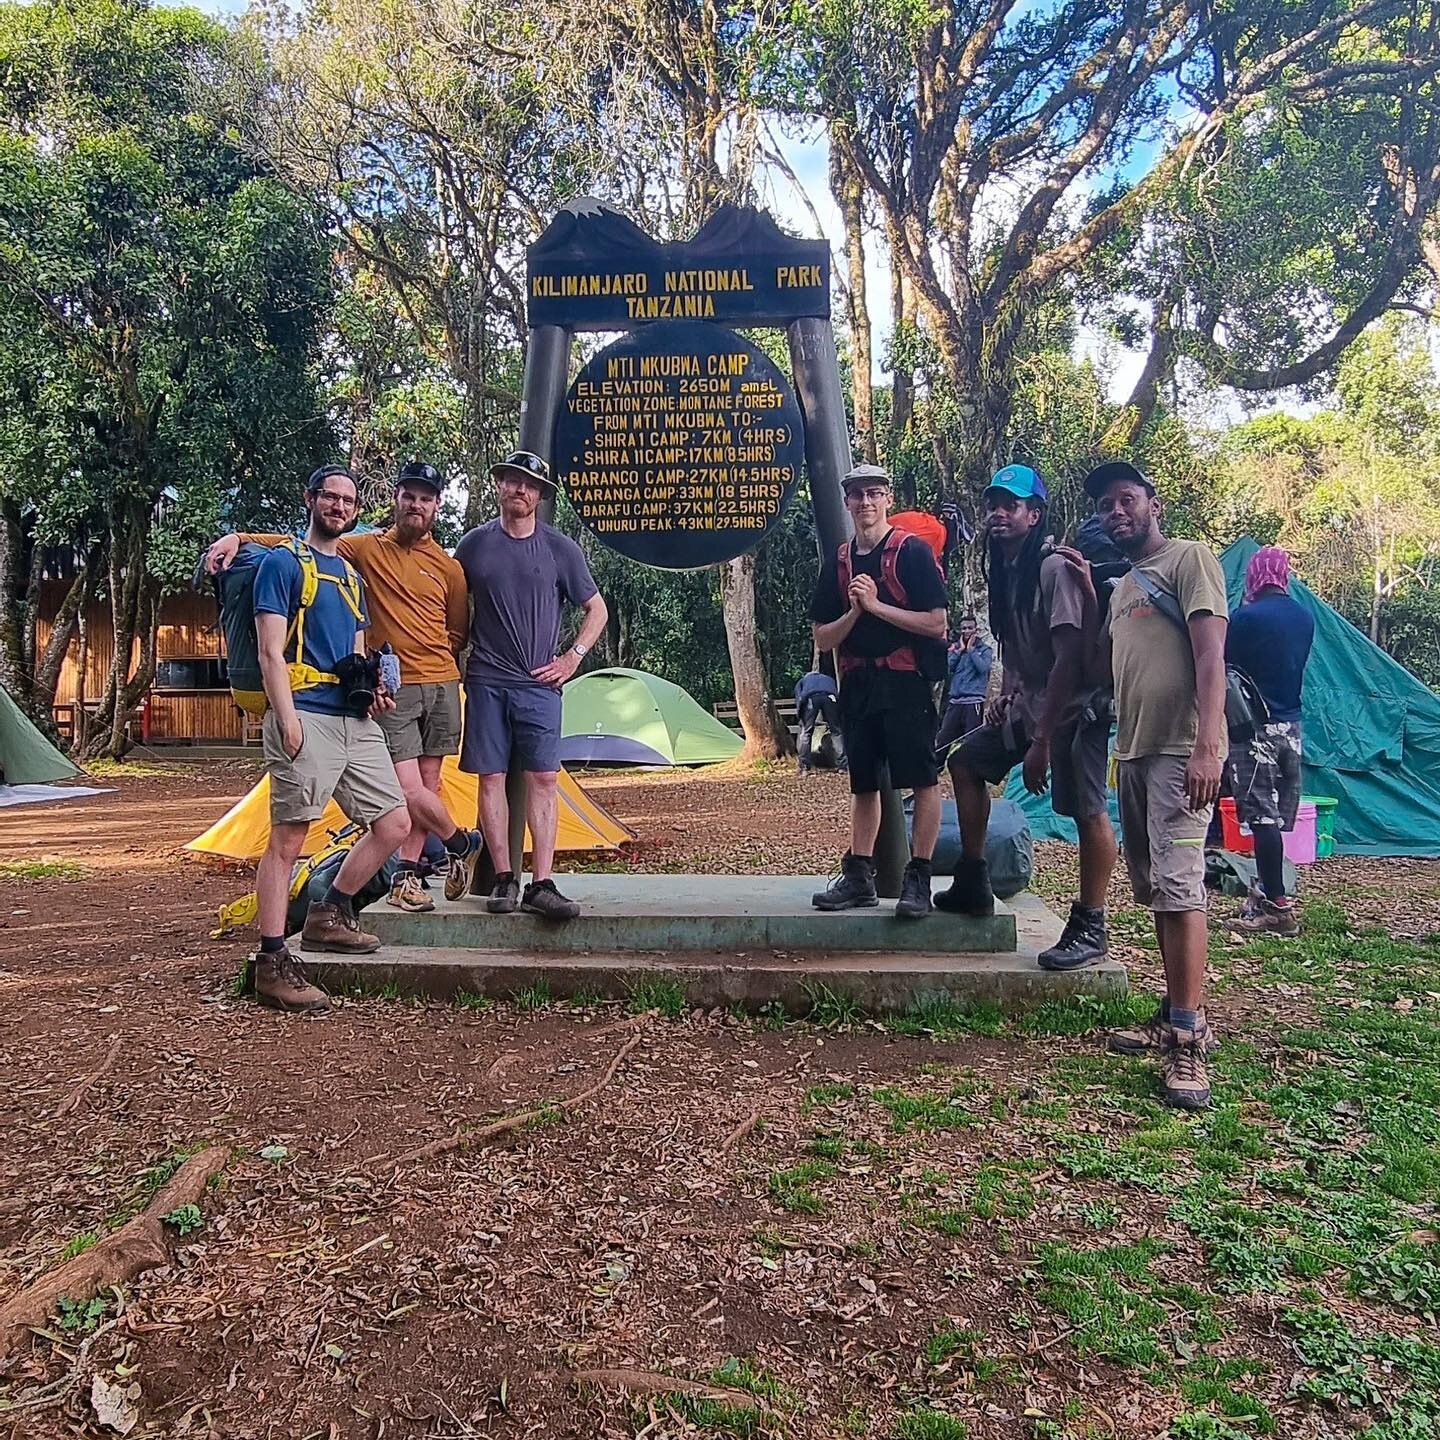 Reached Mti Mkubwa camp (2650m), which is right in the heart of Mount Kilimanjaro's rainforest zone.

We had a great evening eating popcorn and playing Uno, surrounded by the busy, never-sleeping life of the rainforest. #TheLastRideProject

@zorali @